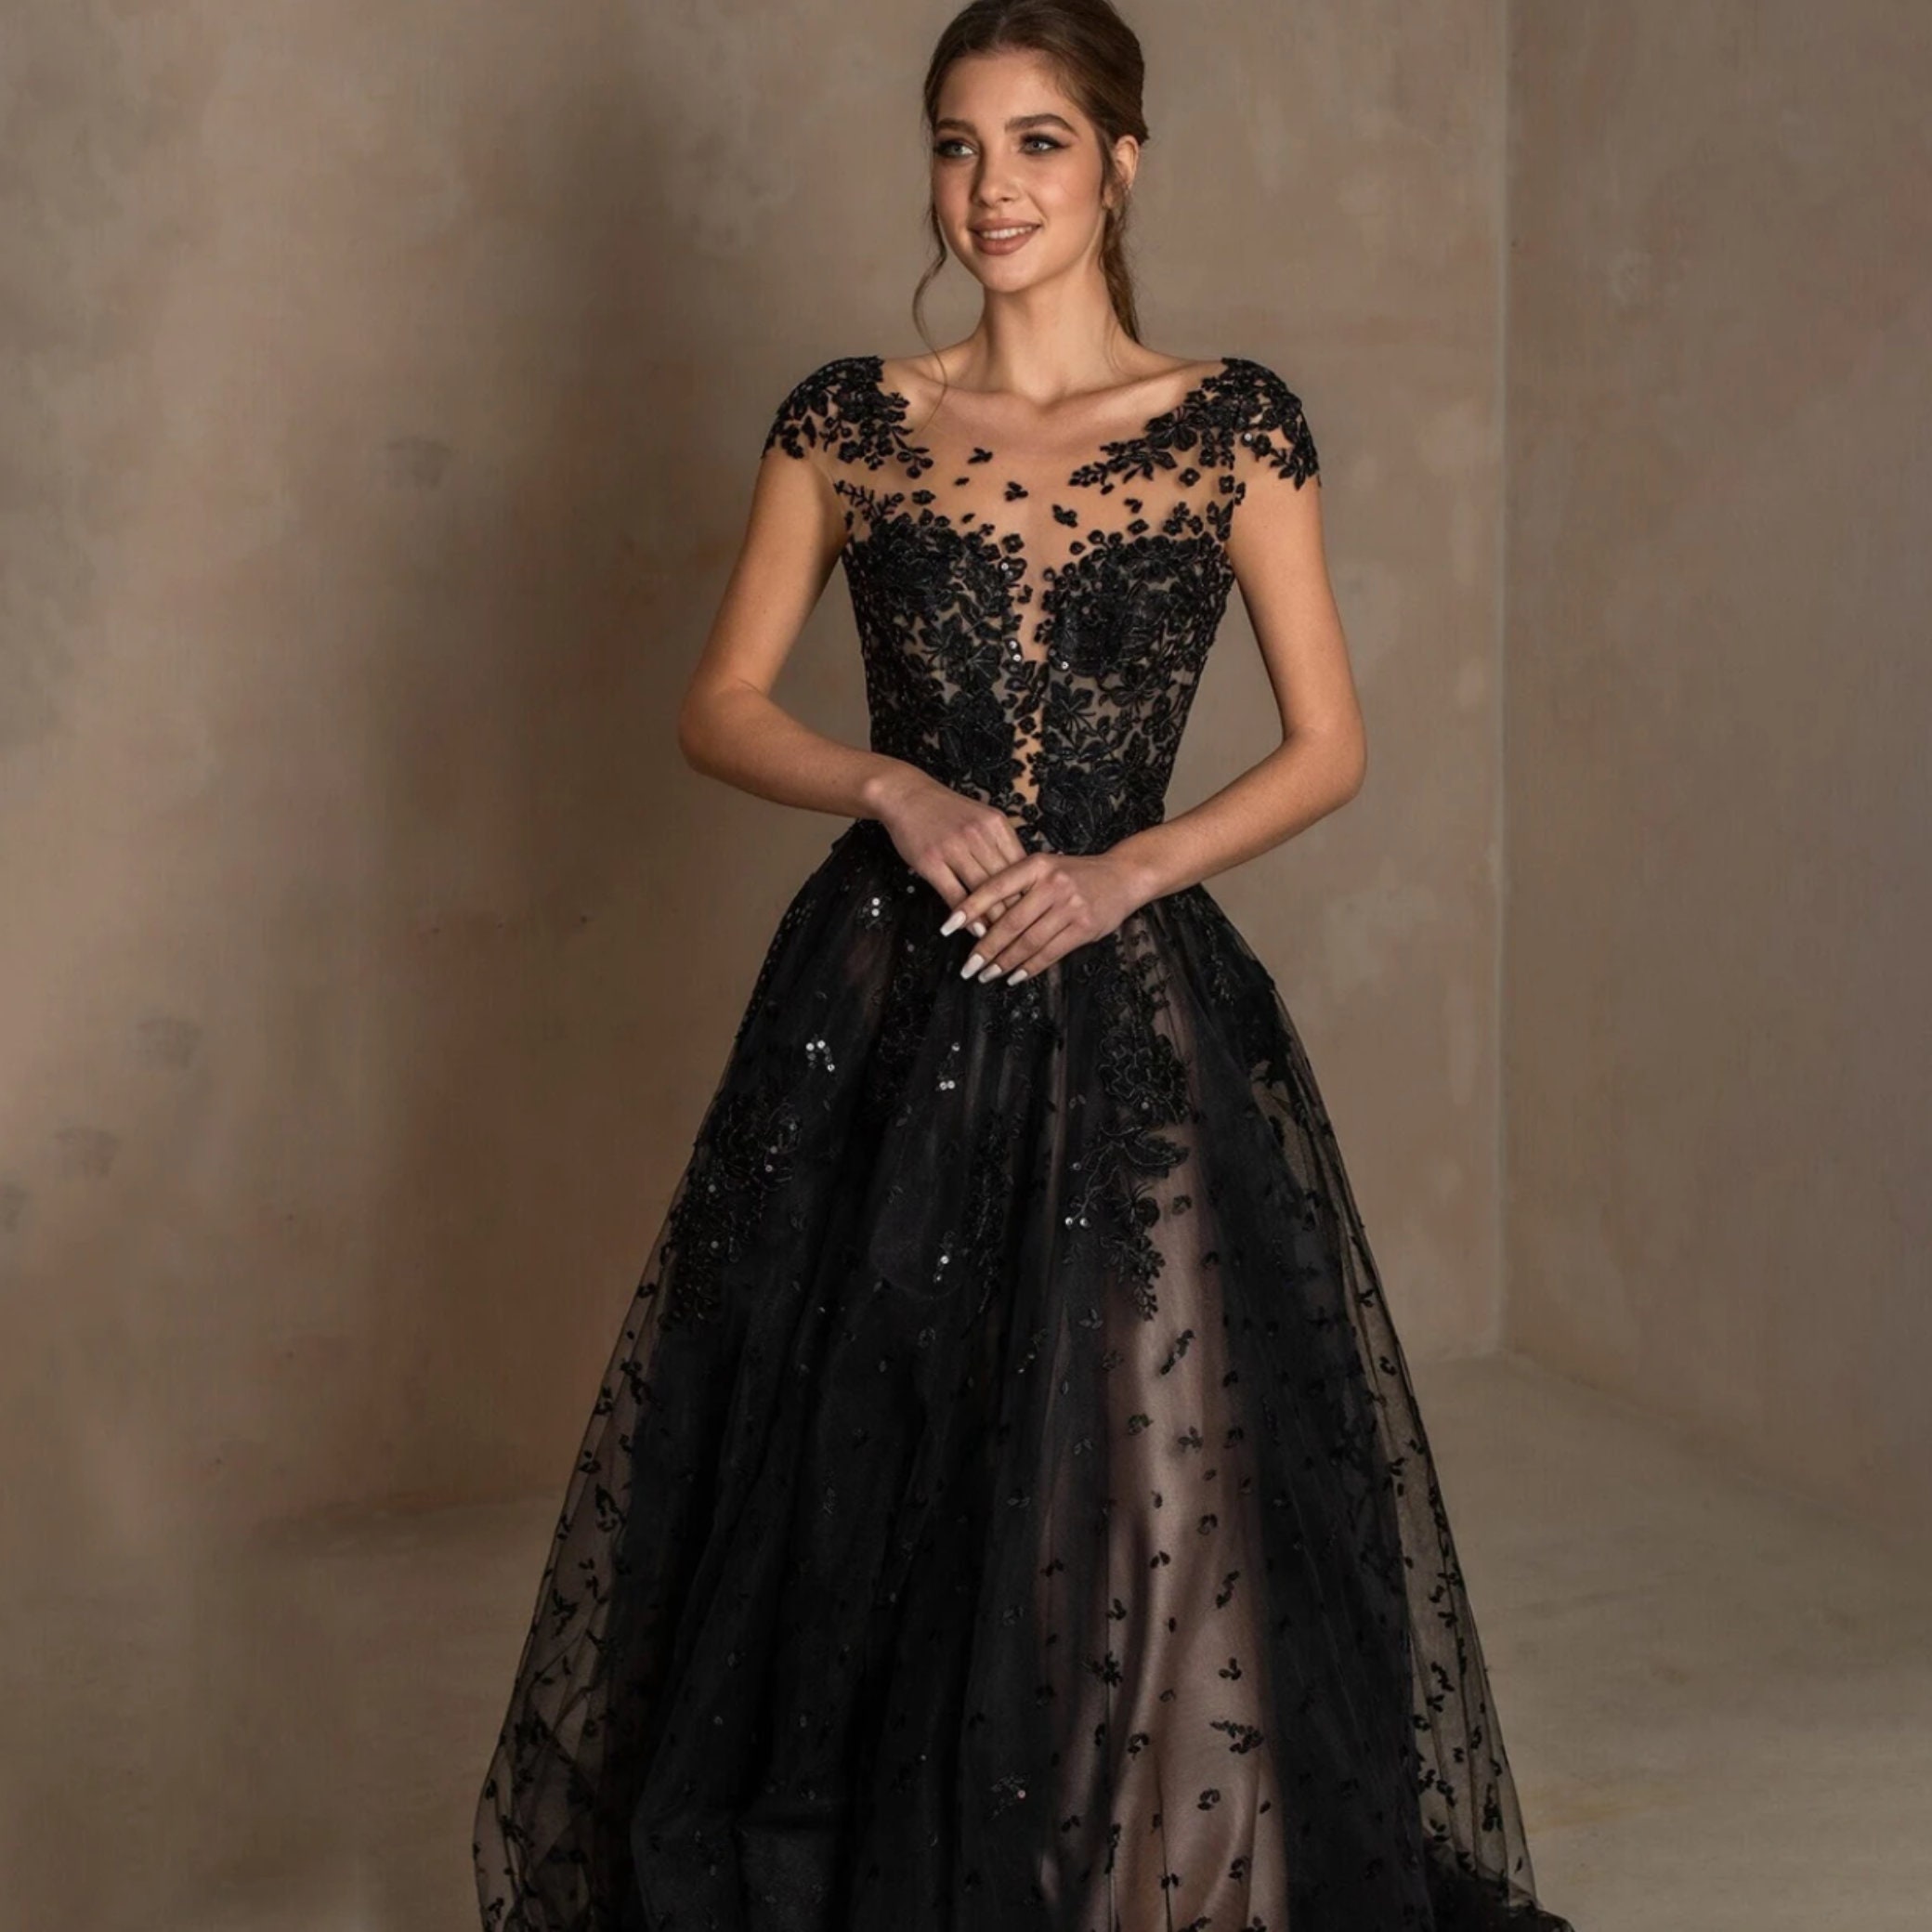 Black Embellished Ball Gown with 3/4 Sleeves – Trendy Divva